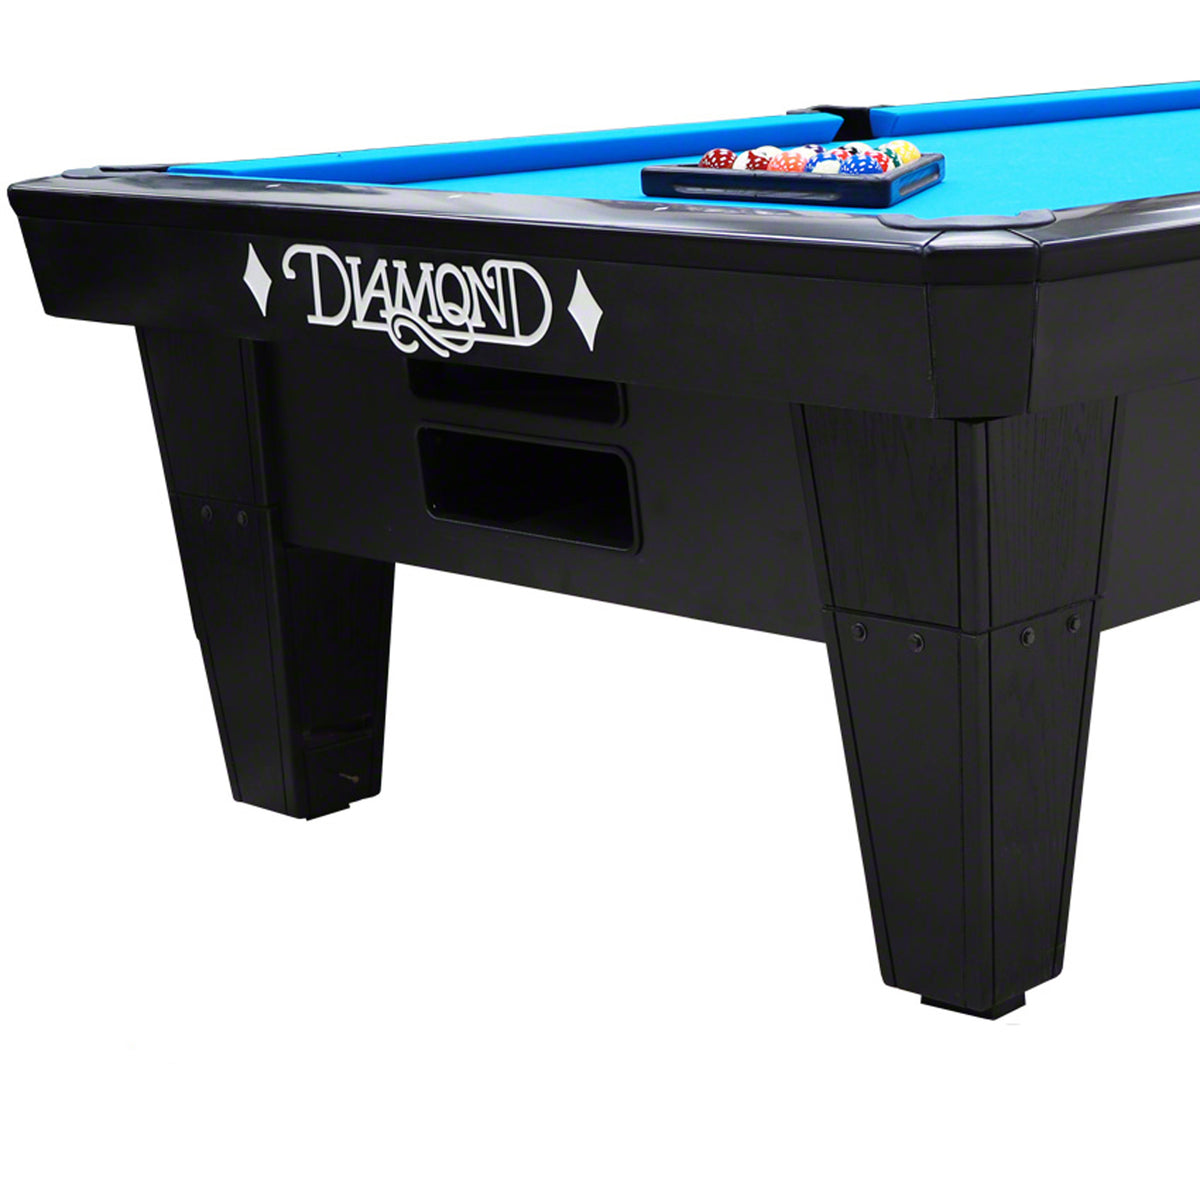 Wooden And Slates Black 9 Foot Imported Pool Tables, Model Number:  TBCHALLENGER004